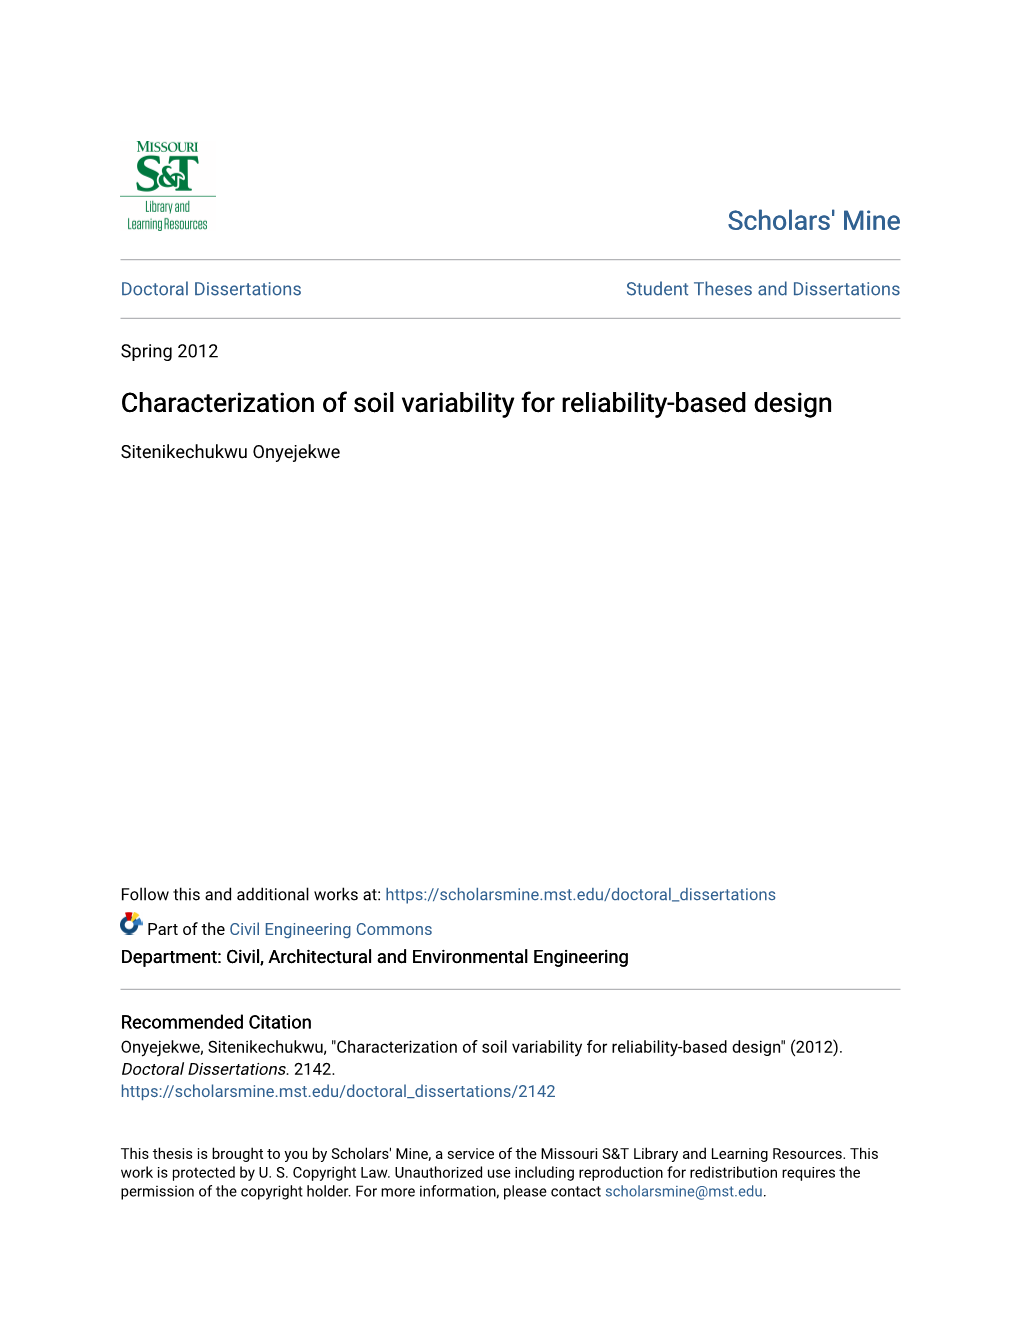 Characterization of Soil Variability for Reliability-Based Design